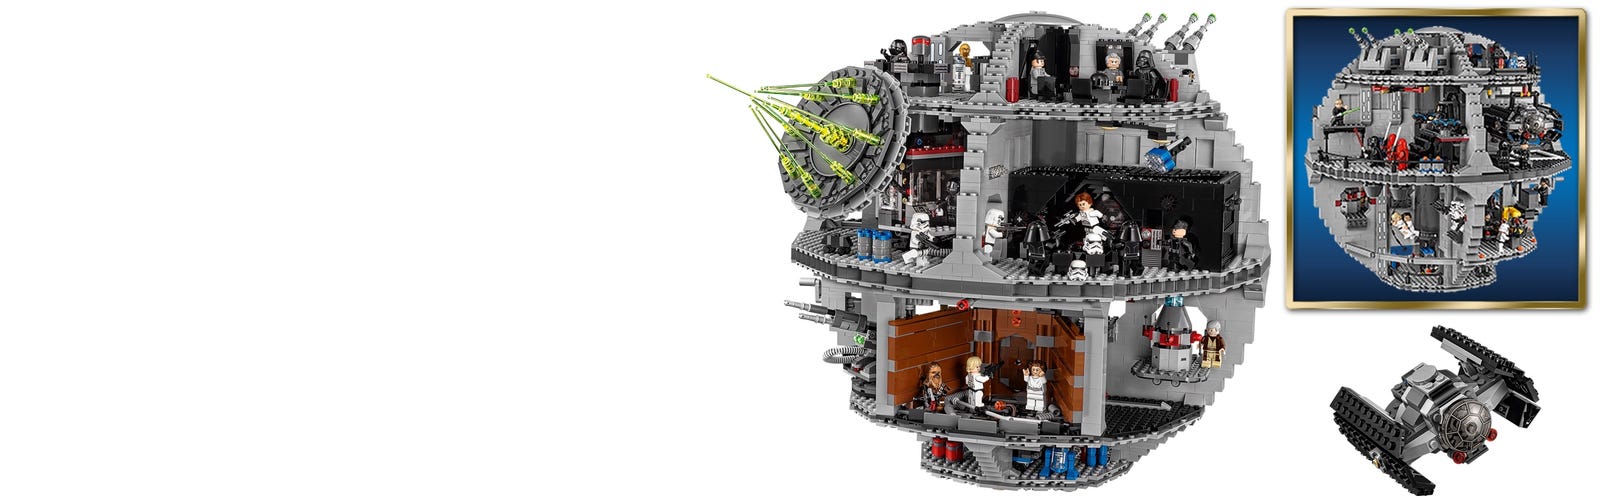 Star™ 75159 | Star Wars™ | Buy online at the Official LEGO® Shop BE